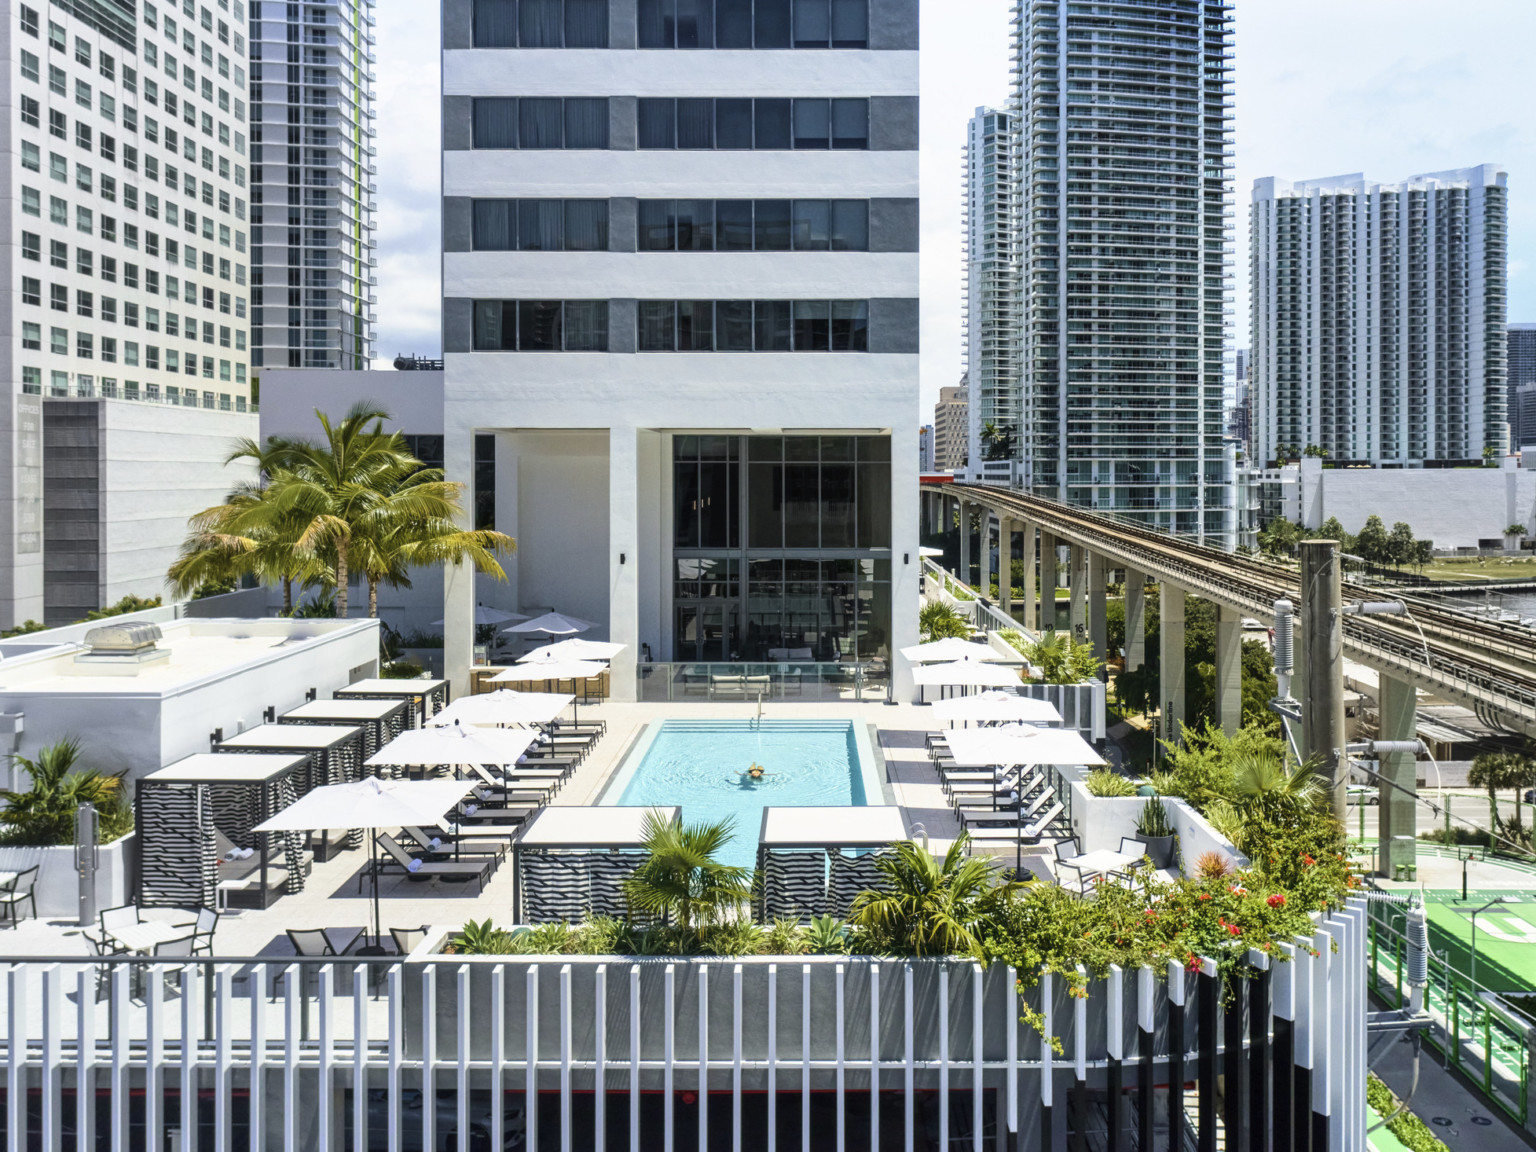 View of sky pool at AC Hotel by Marriott & Element Miami Brickell surrounded by bustling city, adjacent Biscayne Bay, Miami River